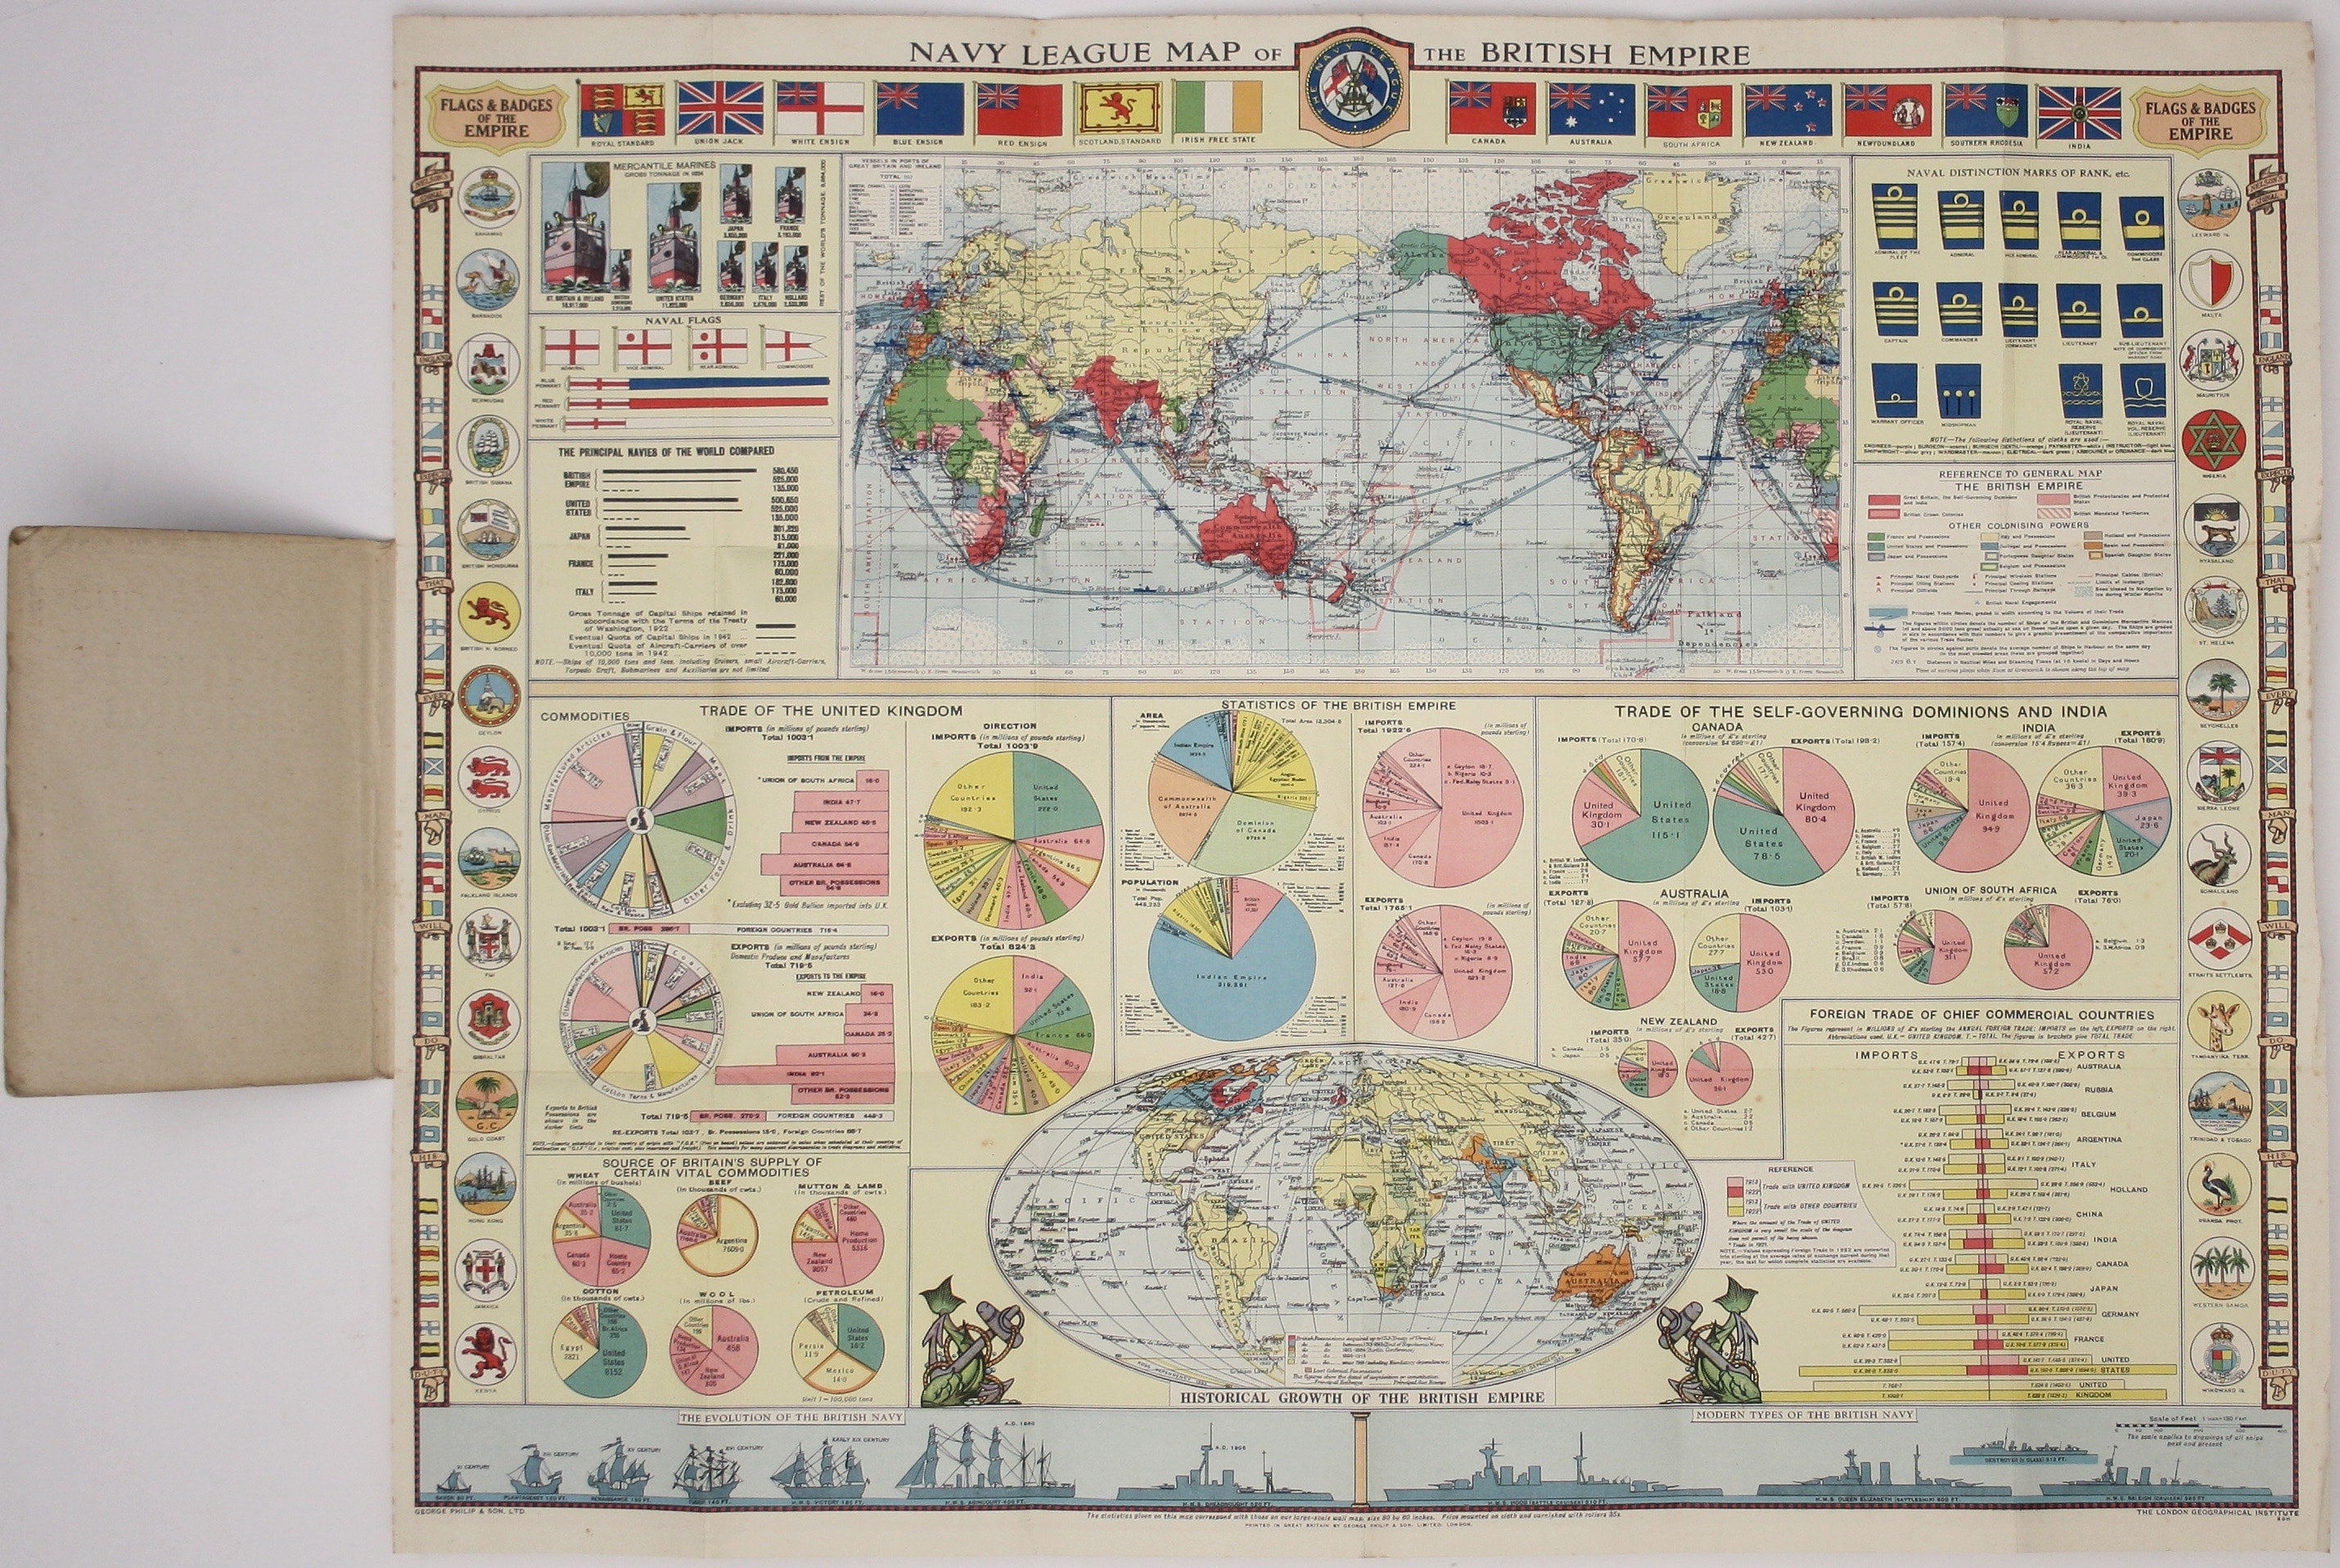 Navy League Pocket Map of the British Empire